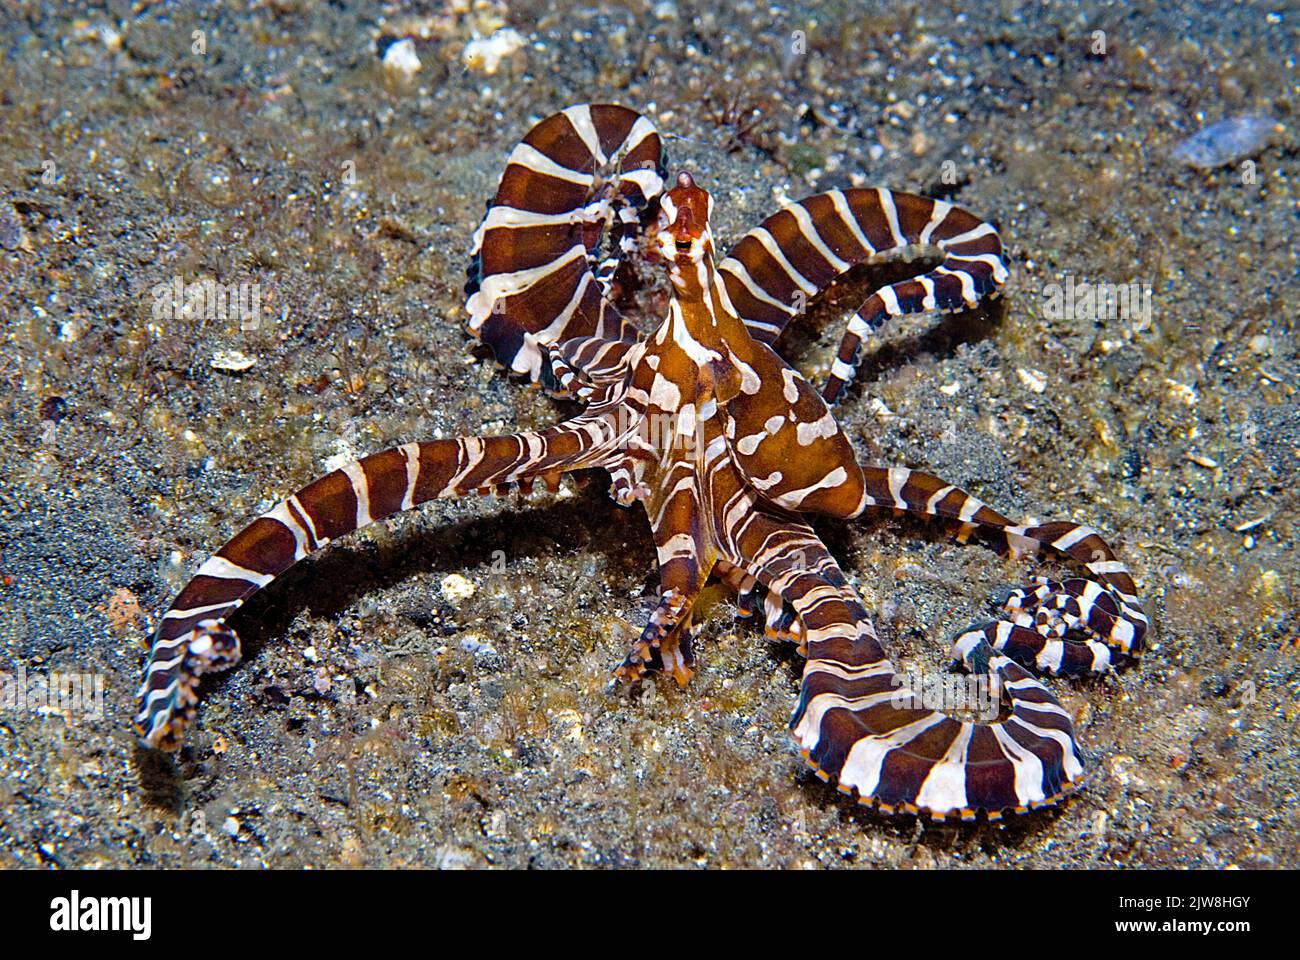 Mimic Octopus (Thaumoctopus mimicus), has the ability to imitate various sea creatures by changing shape and color, Lembeh Strait, Indonesia Stock Photo